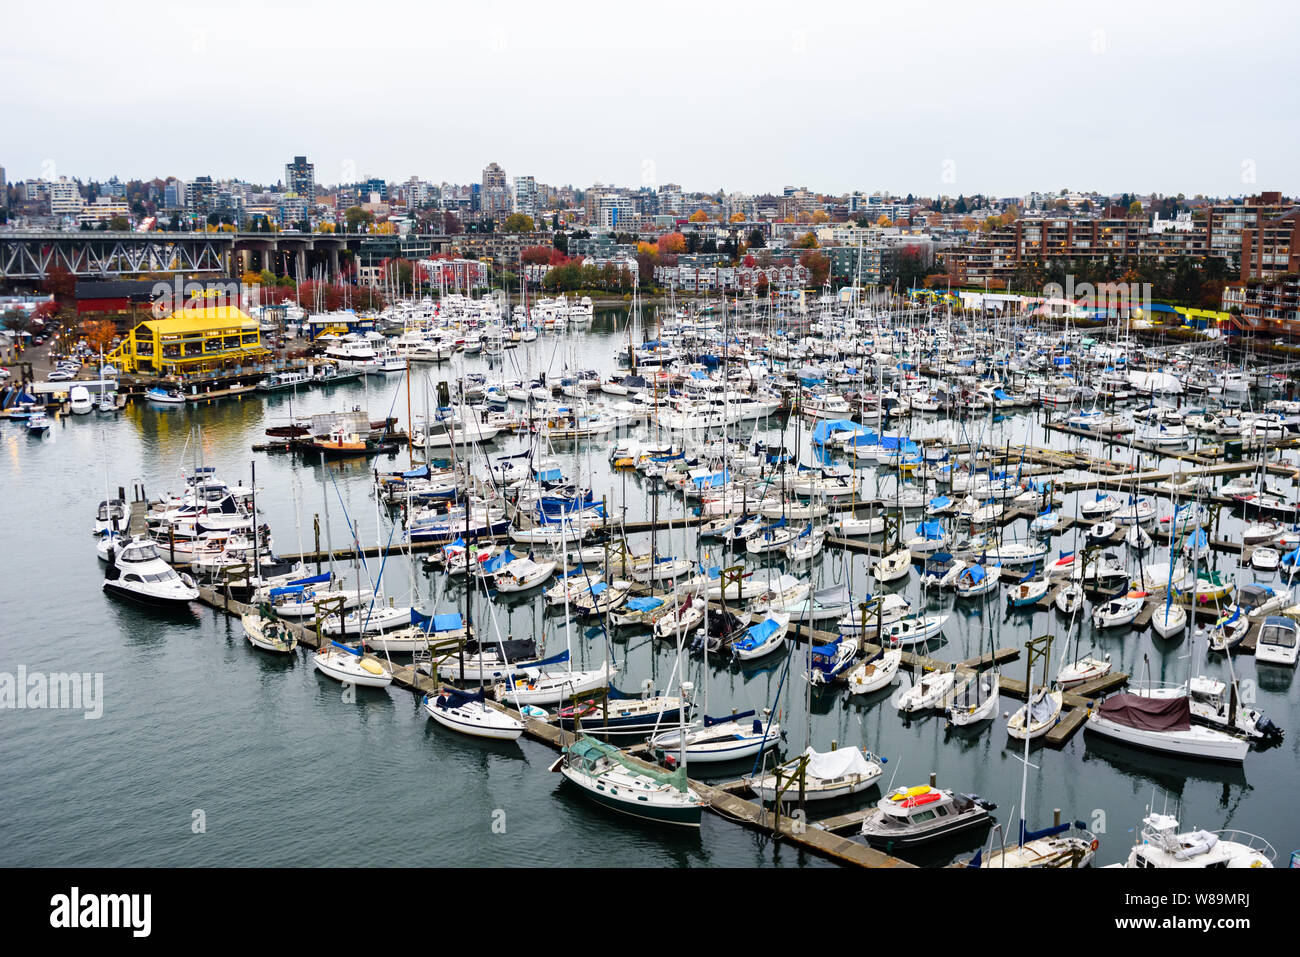 VANCOUVER, BC, CANADA - OCTOBER 27, 2018: The docks near Granville Island are conveniently located with easy access to downtown. Stock Photo